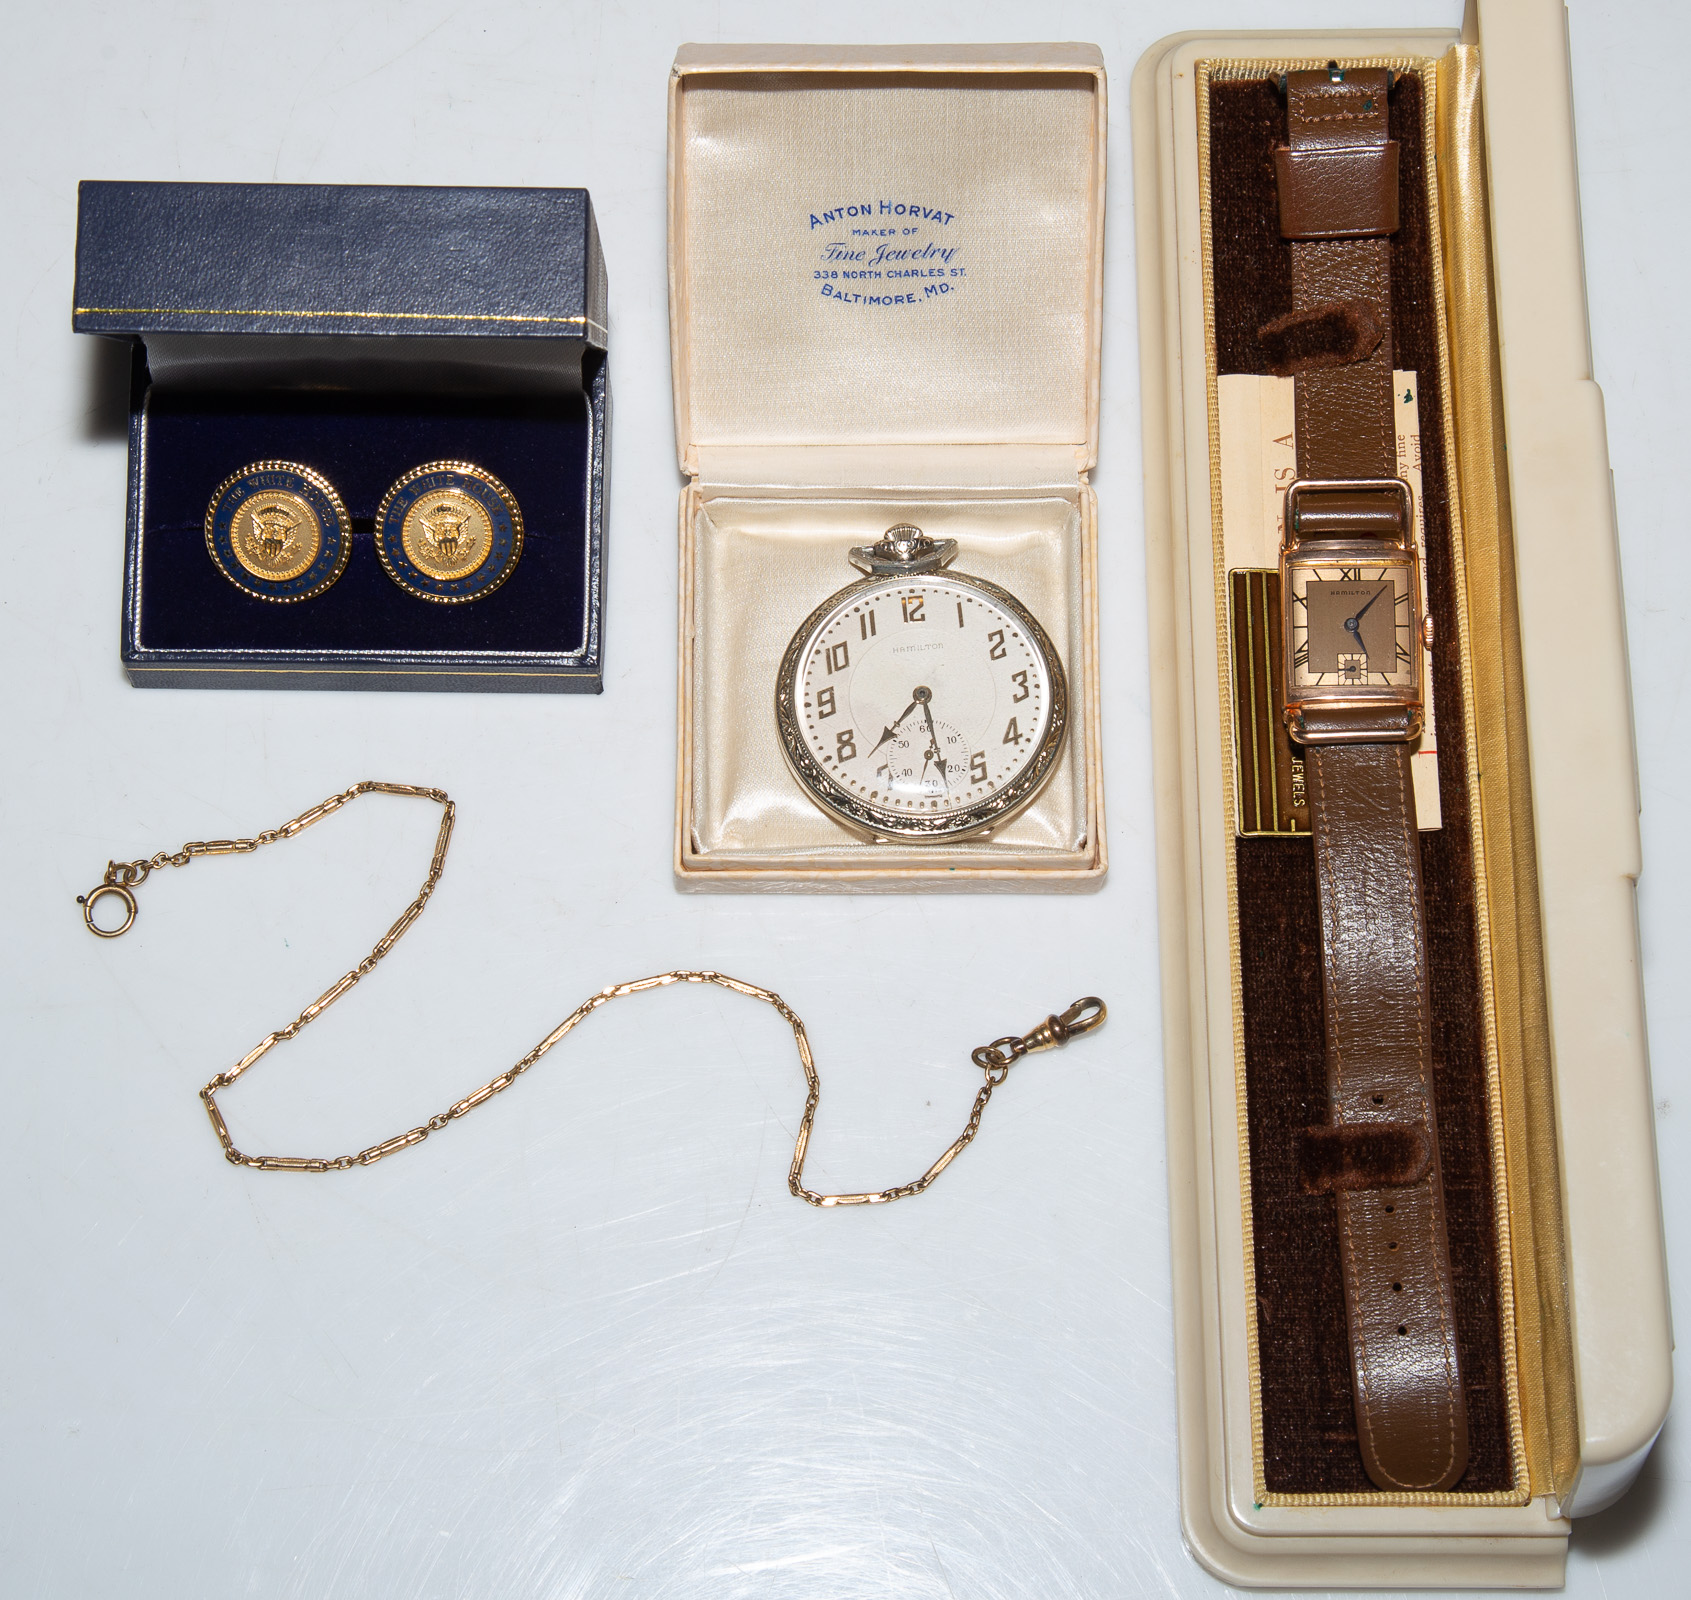 TWO HAMILTON WATCHES, ONE 14K GOLD-FILLED,